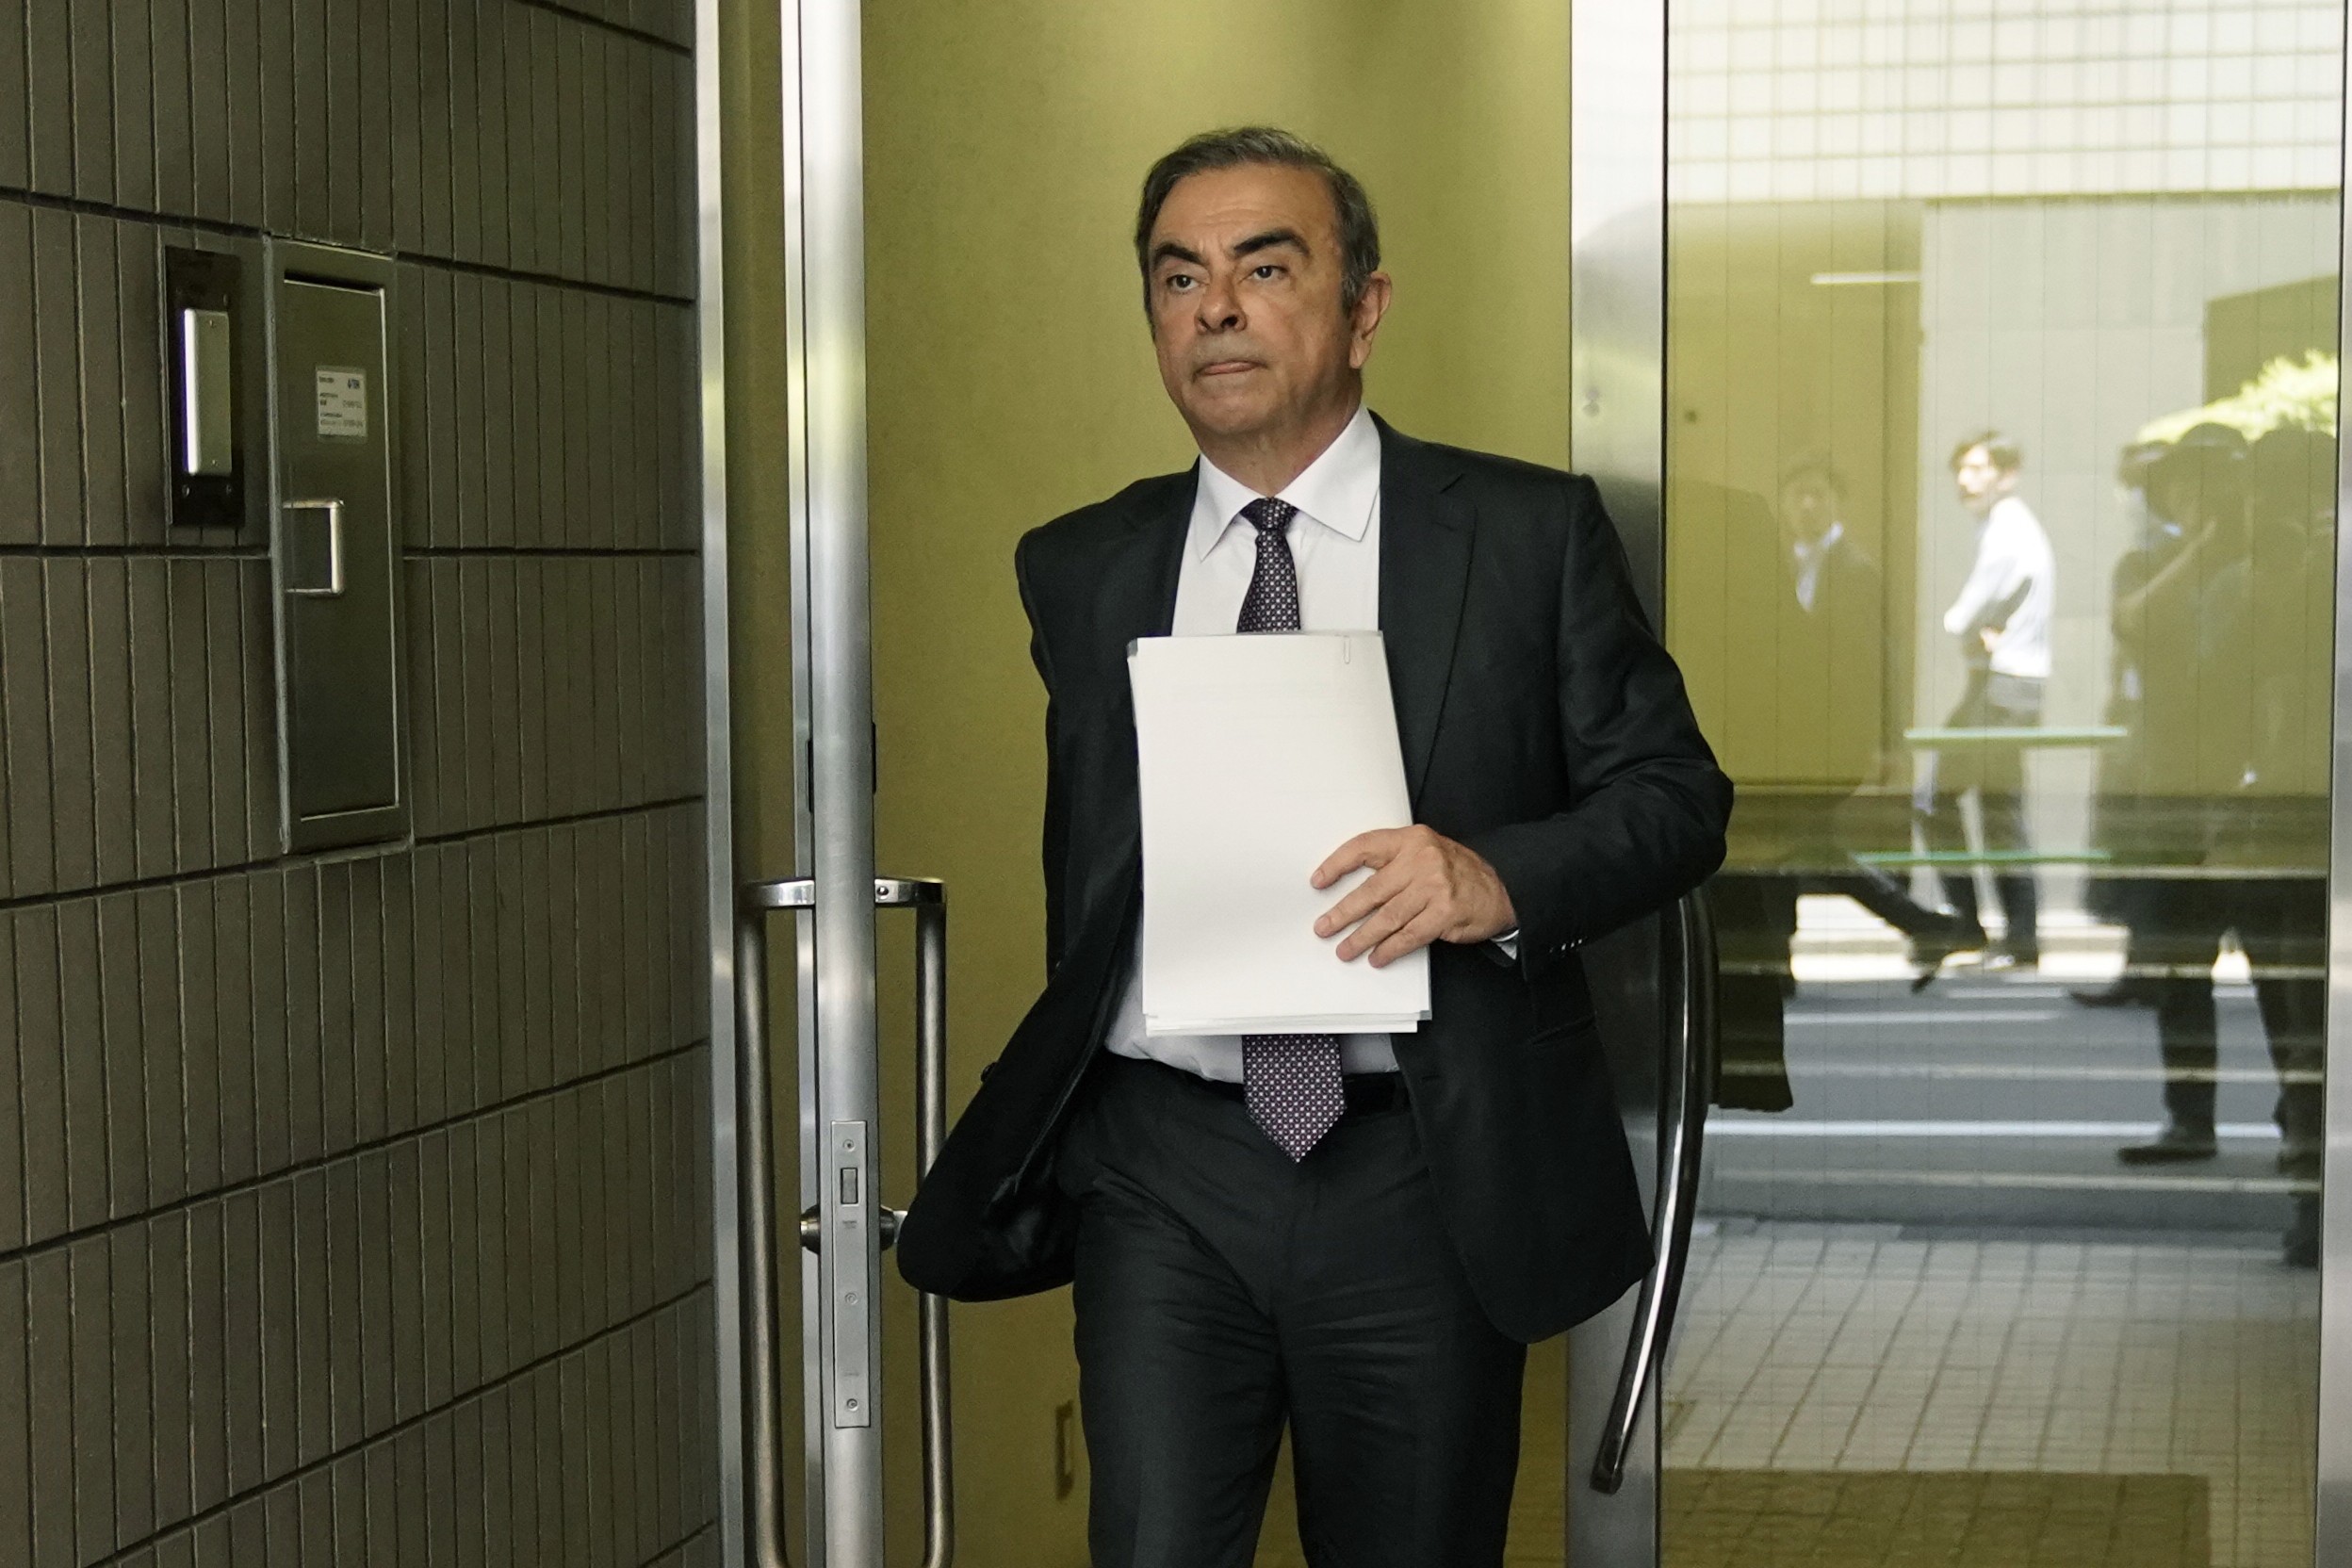 Carlos Ghosn, former chairman of Nissan, leaves his lawyer’s office in Tokyo. Photo: Bloomberg